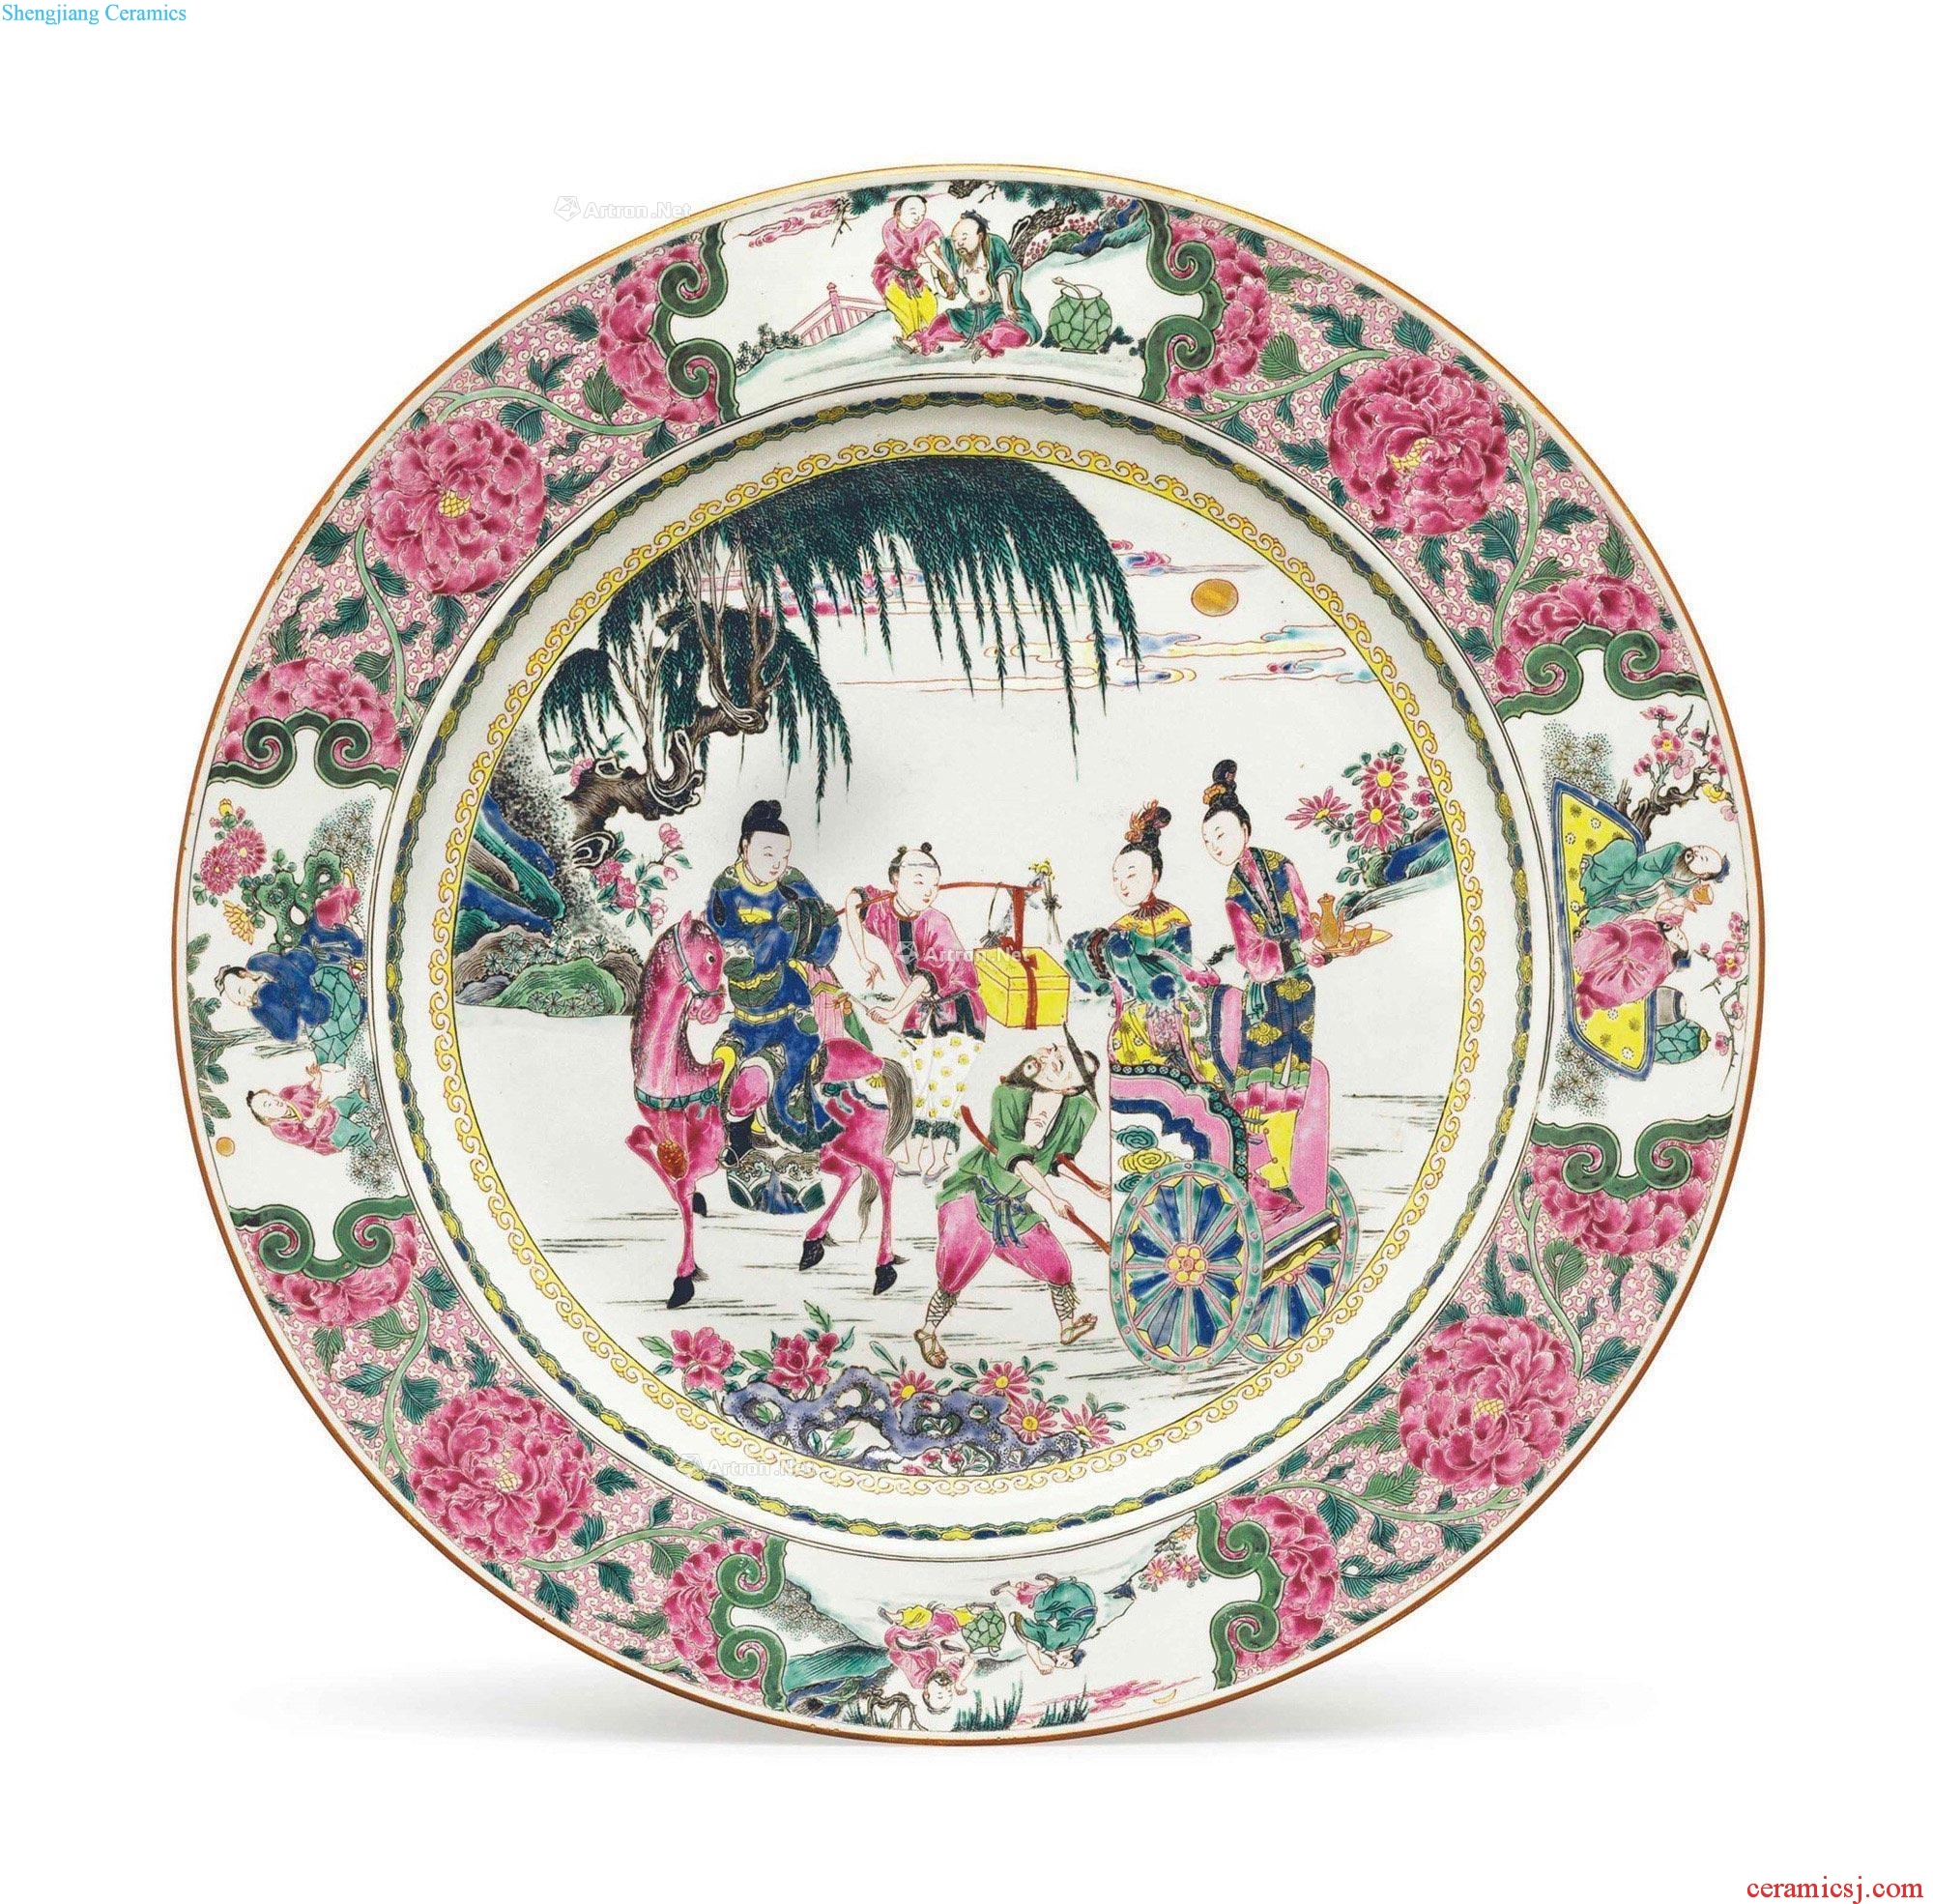 Yongzheng period, 1723-35 years - A VERY LARGE FAMILLE ROSE DISH